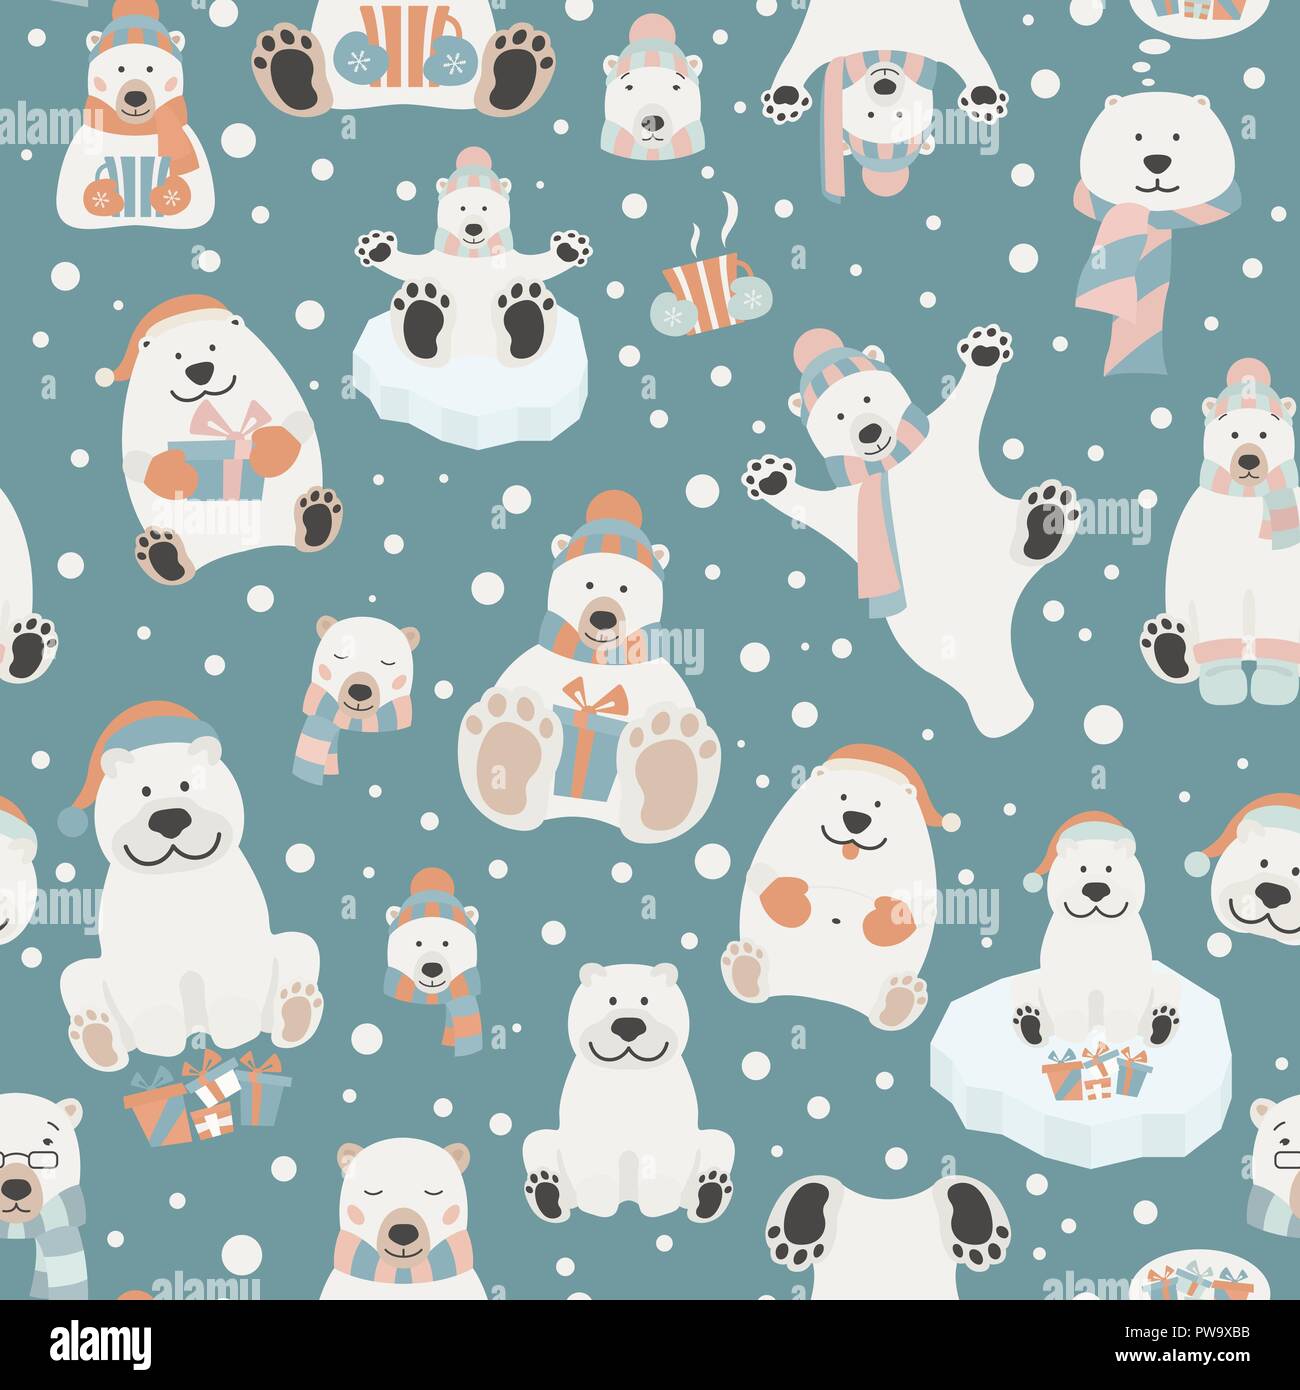 Cute polar bear seamless pattern. Elements for christmas holiday greeting card, poster design. Vector illustration Stock Vector